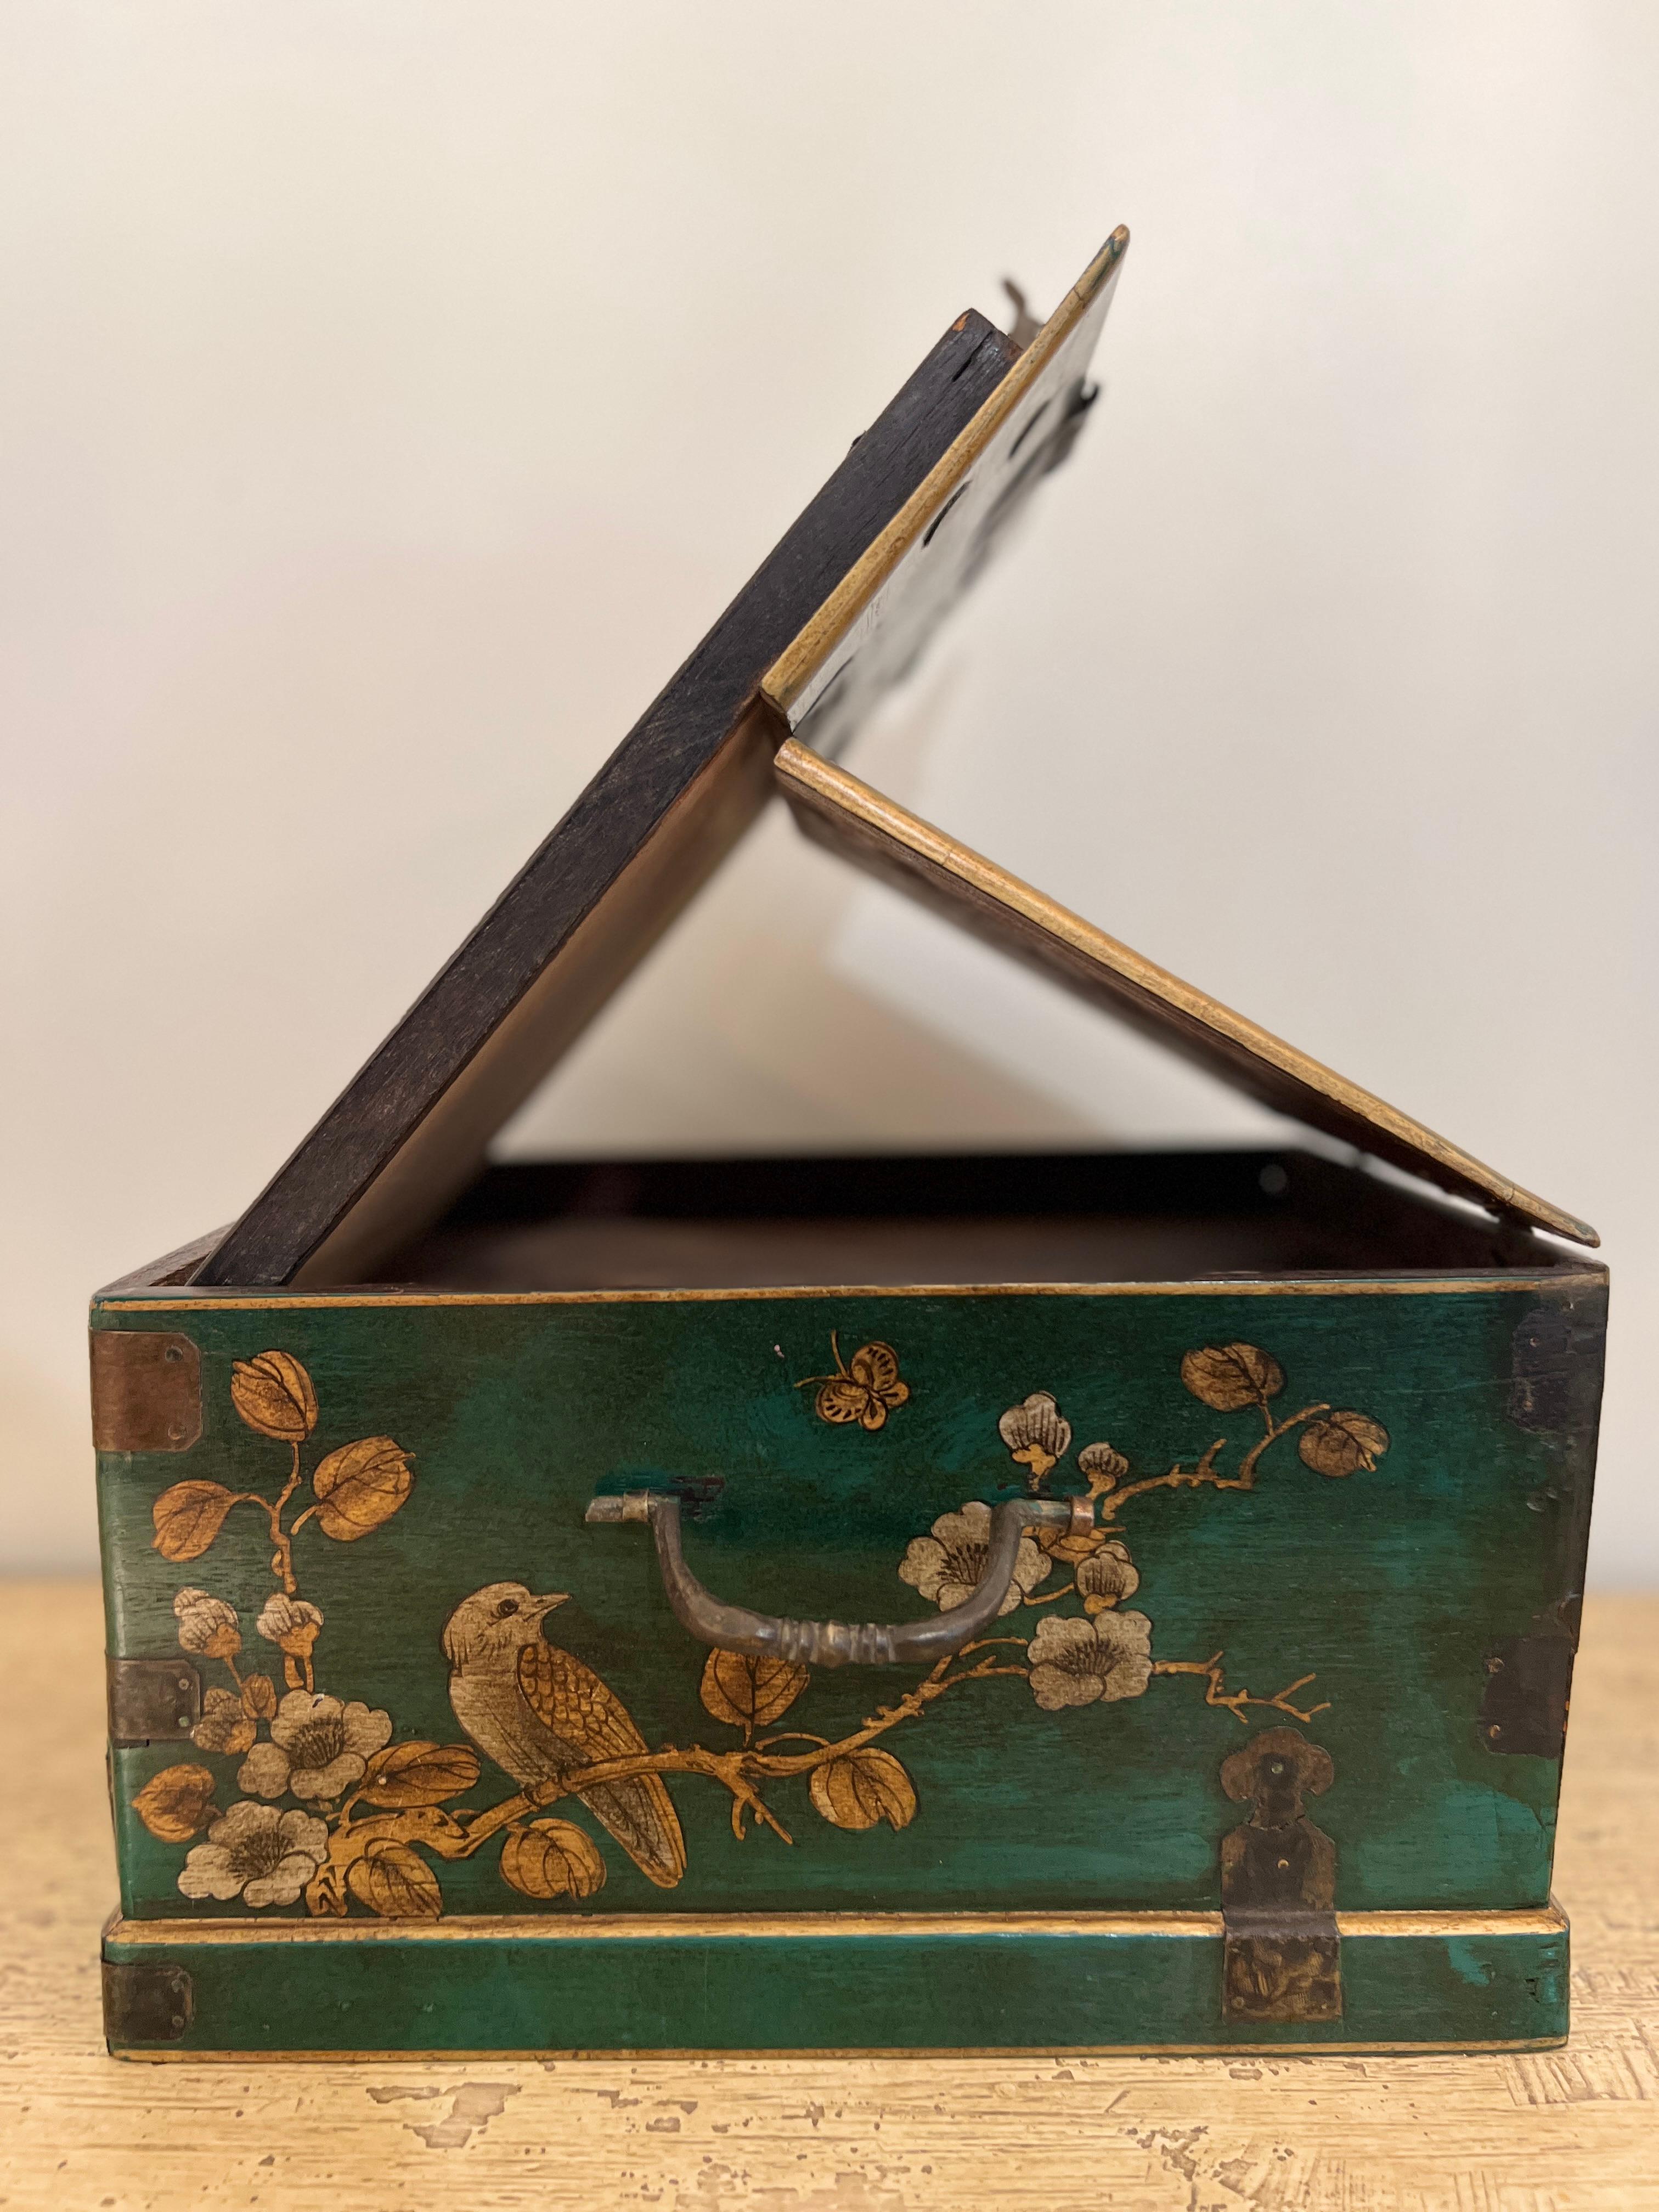 Antique Chinese Wooden Jewelry Box, a masterpiece of intricate inlay work. Handcrafted by skilled artisans, it blends authentic Chinese craftsmanship with versatile functionality. This timeless chest is both a collector's item and a symbol of